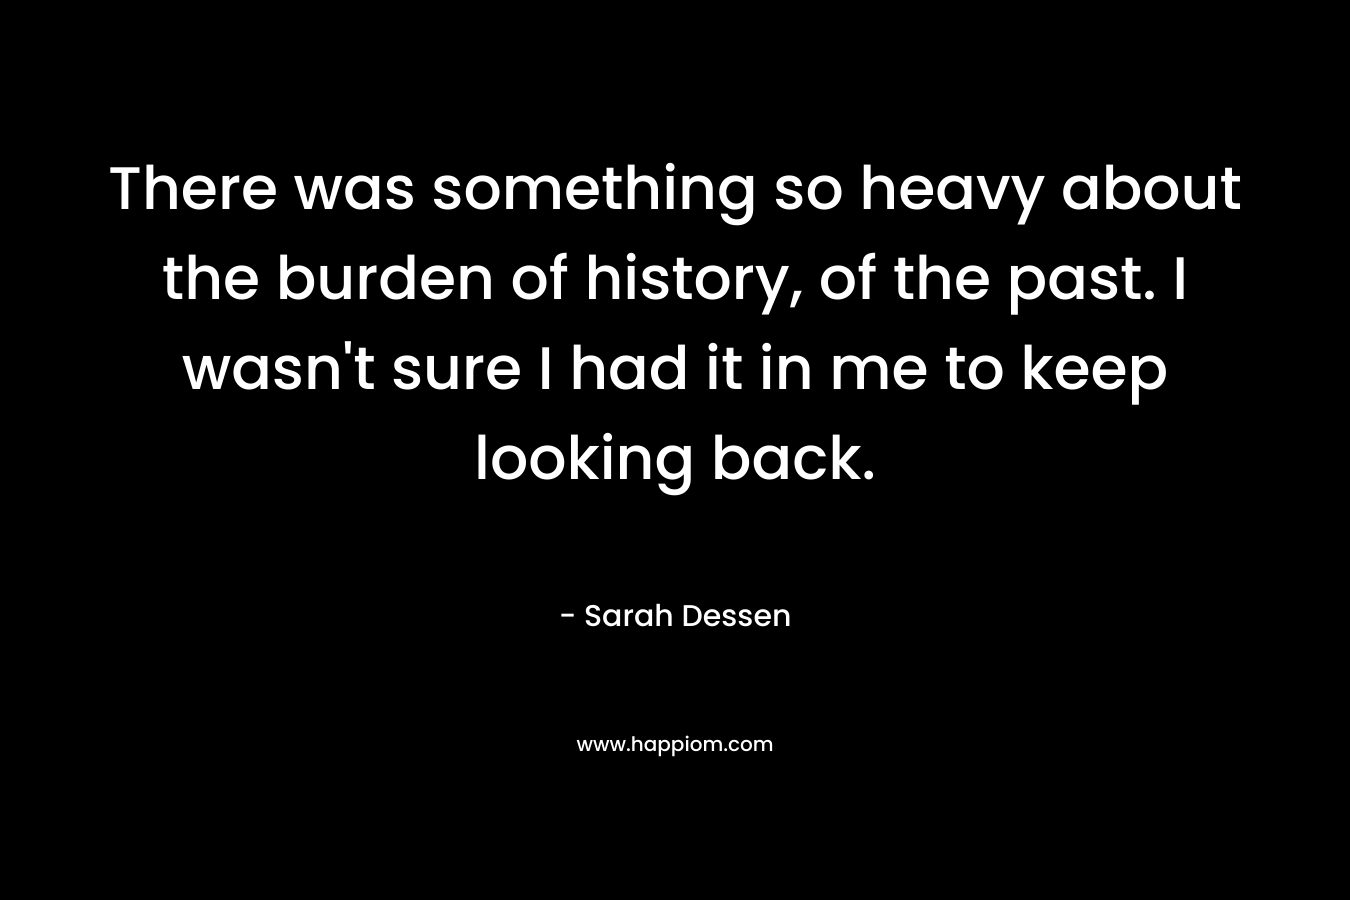 There was something so heavy about the burden of history, of the past. I wasn't sure I had it in me to keep looking back.